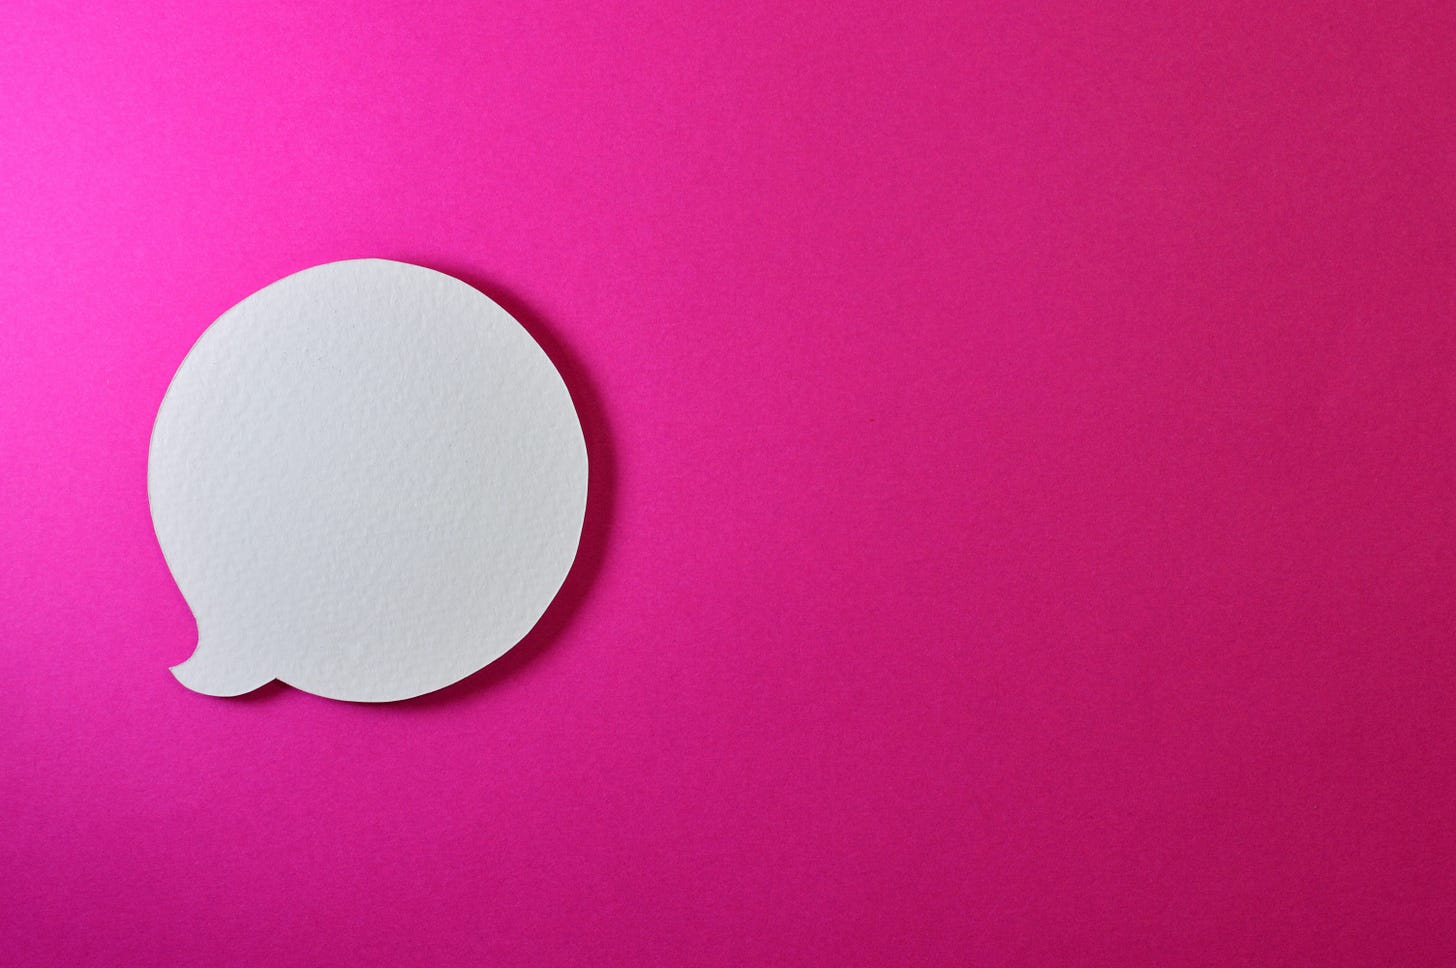 A white conversation bubble on a pink background.